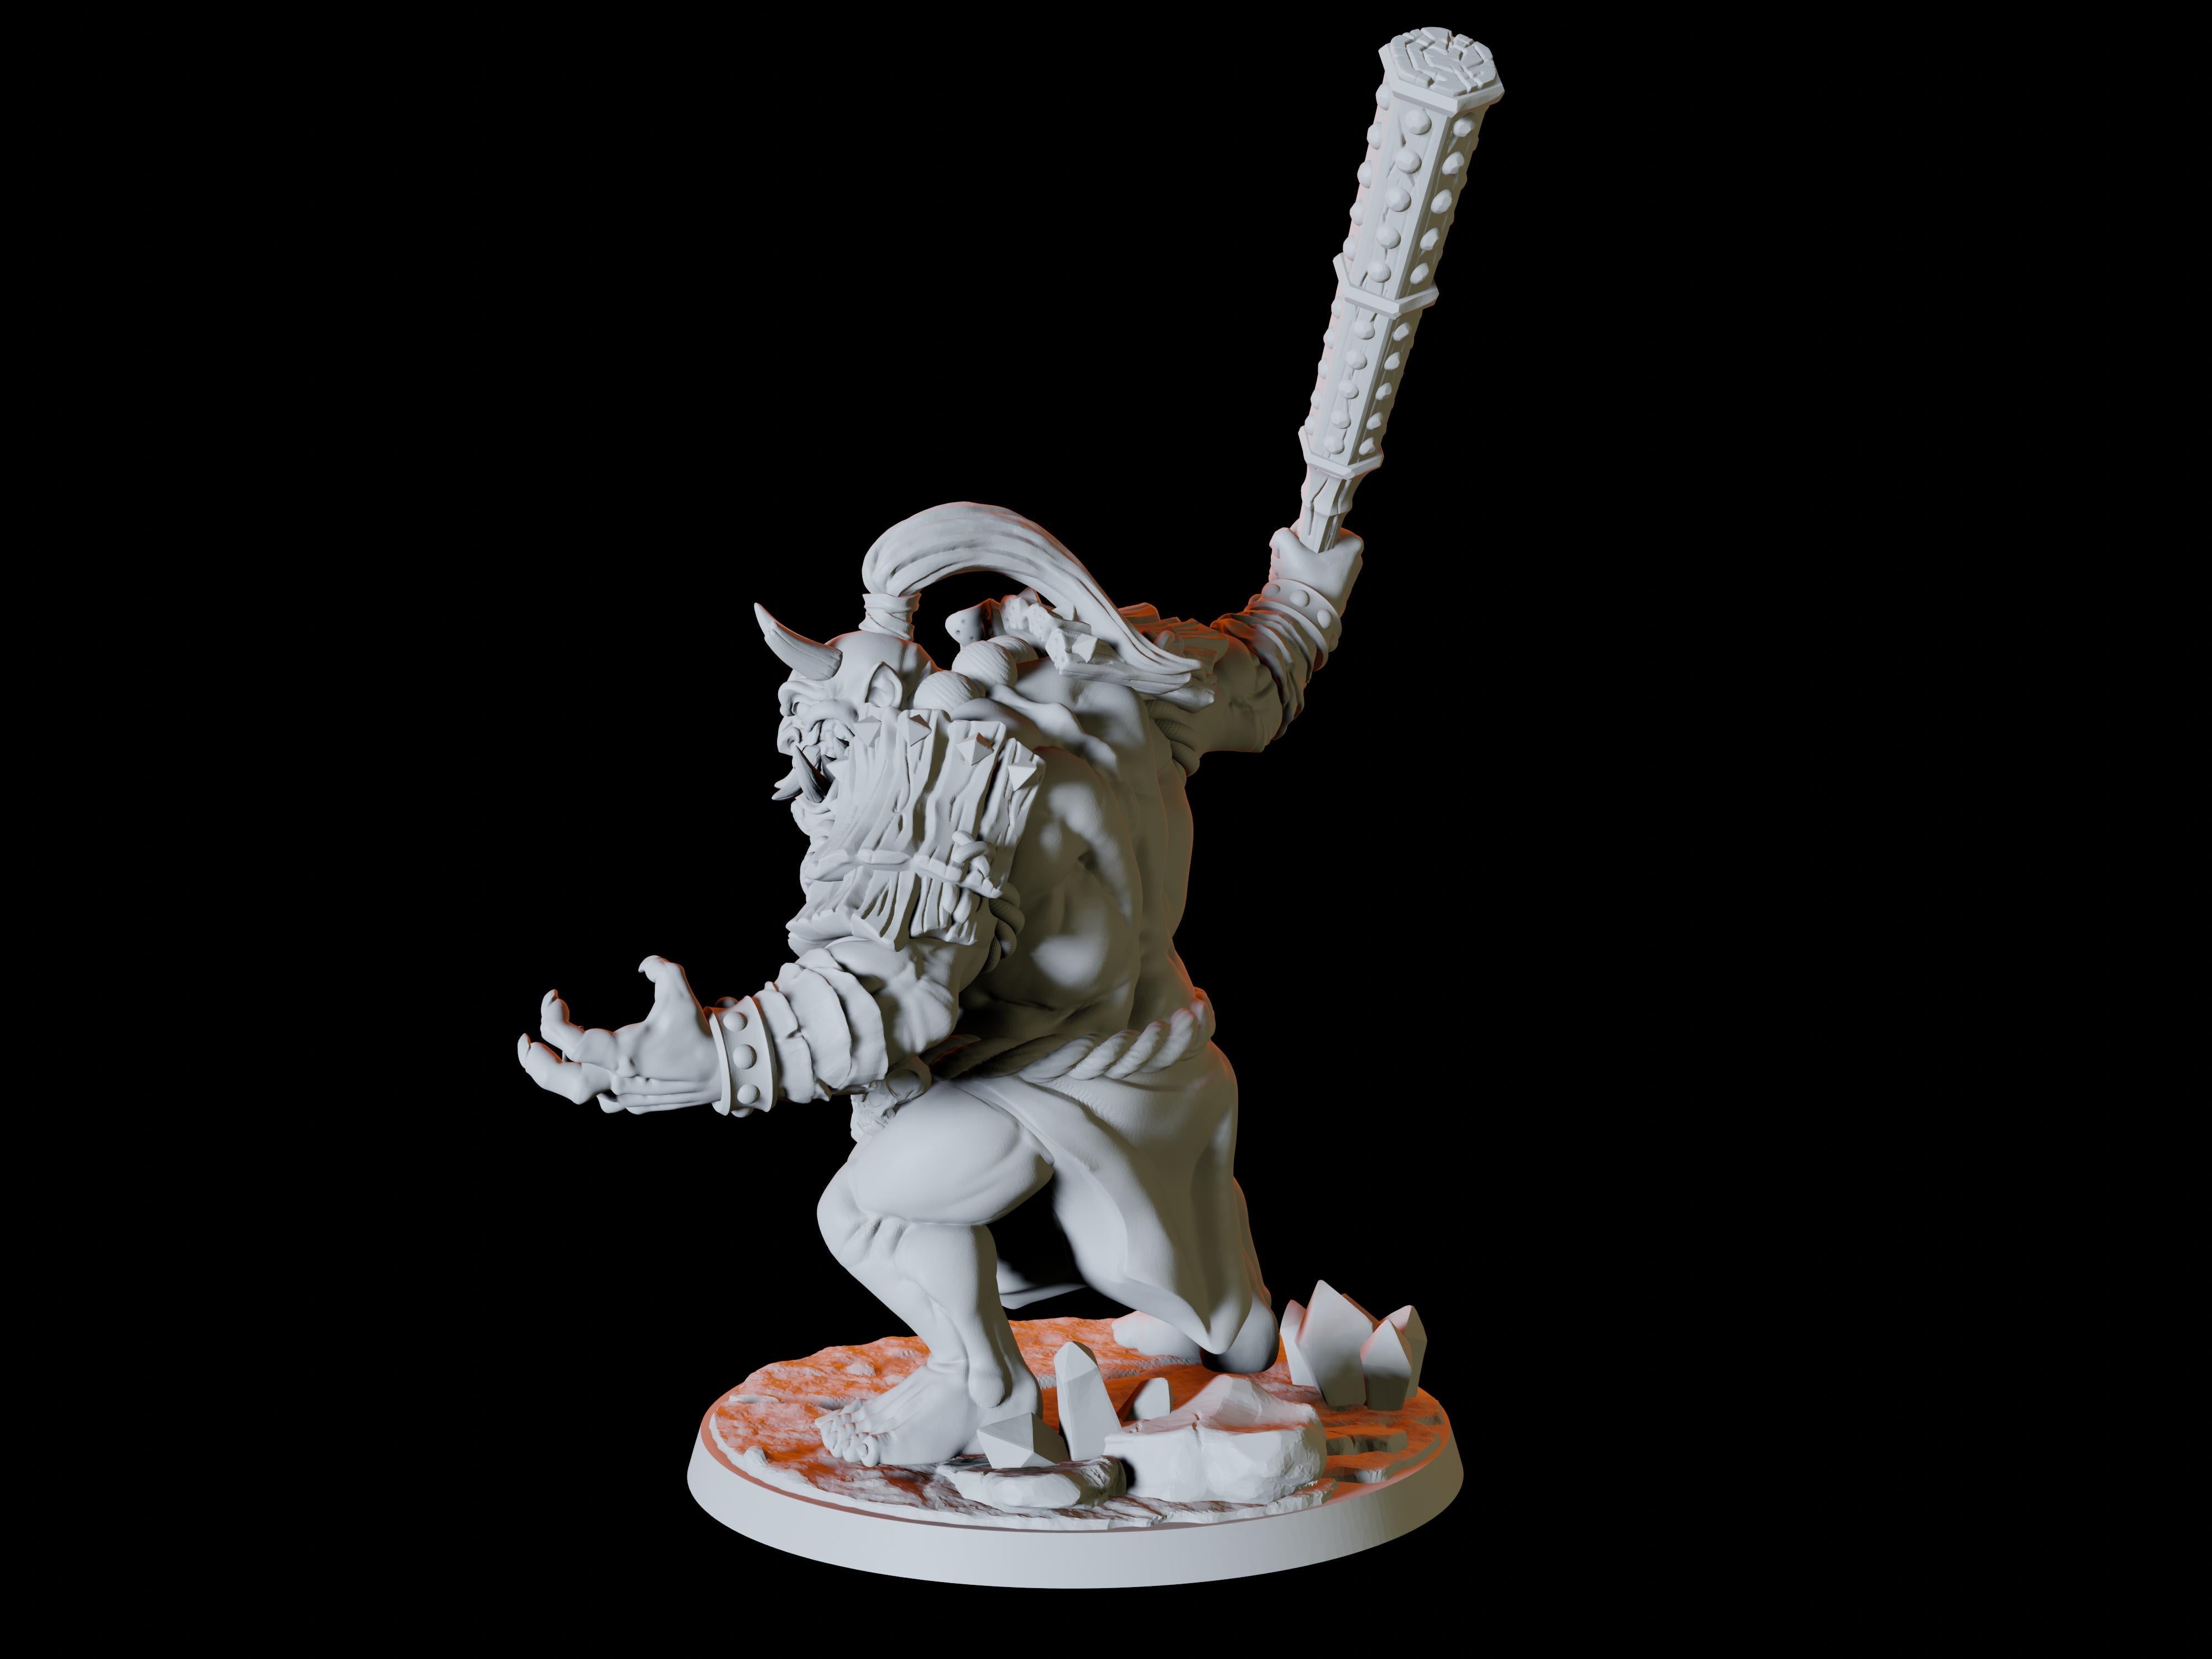 Two Japanese Inspired Ogre Miniatures for Dungeons and Dragons - Myth Forged